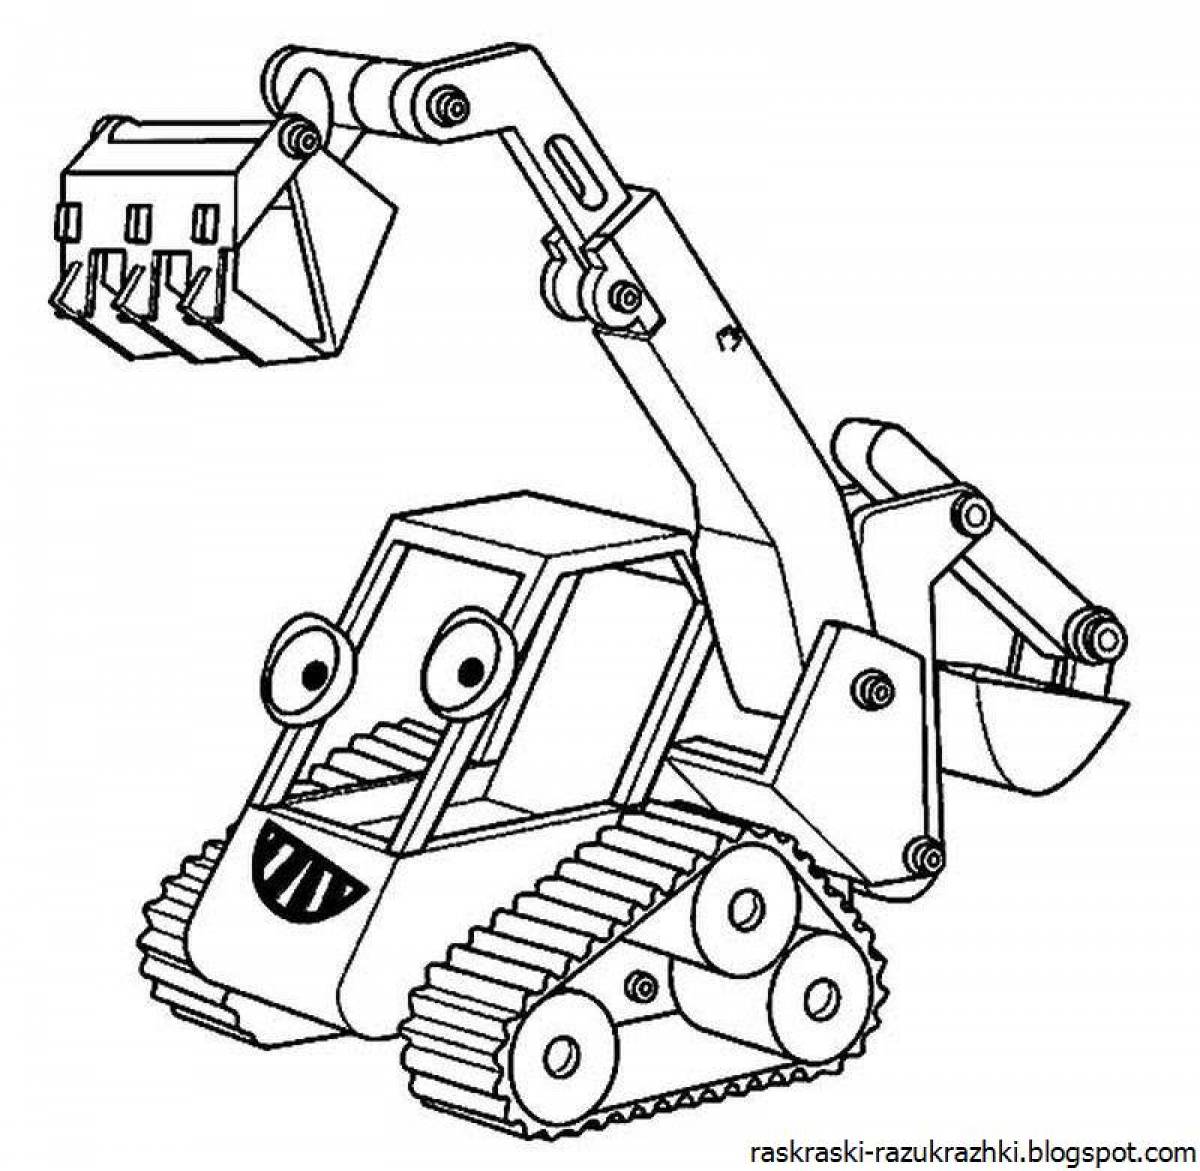 Colour fun excavator coloring book for kids